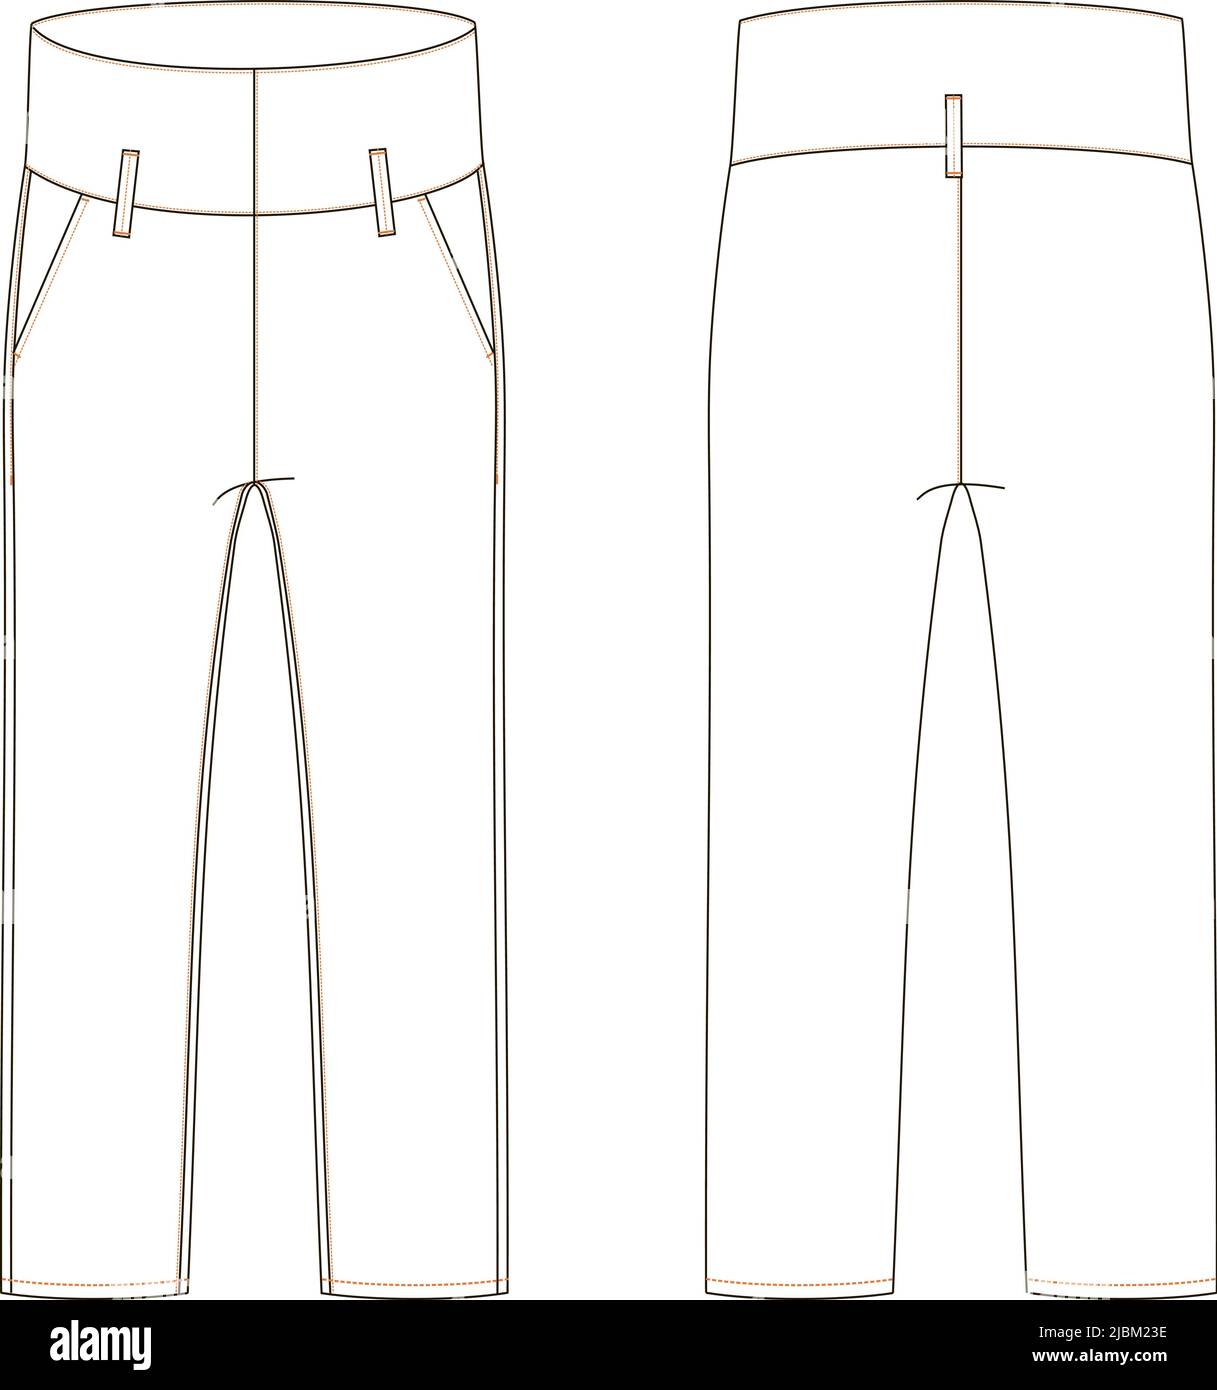 technical sketch of womens trousers with pockets Stock Vector